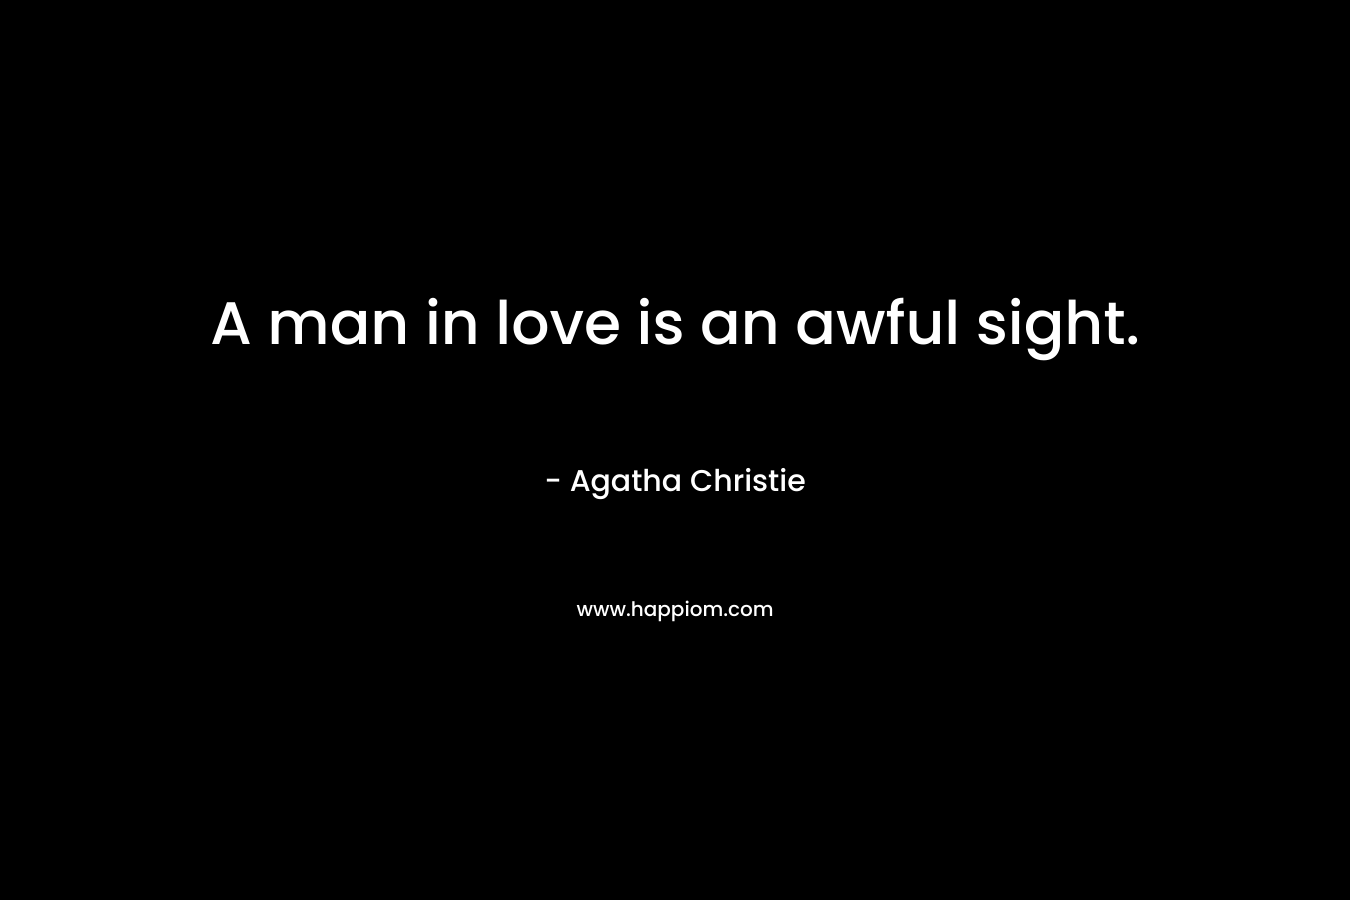 A man in love is an awful sight.